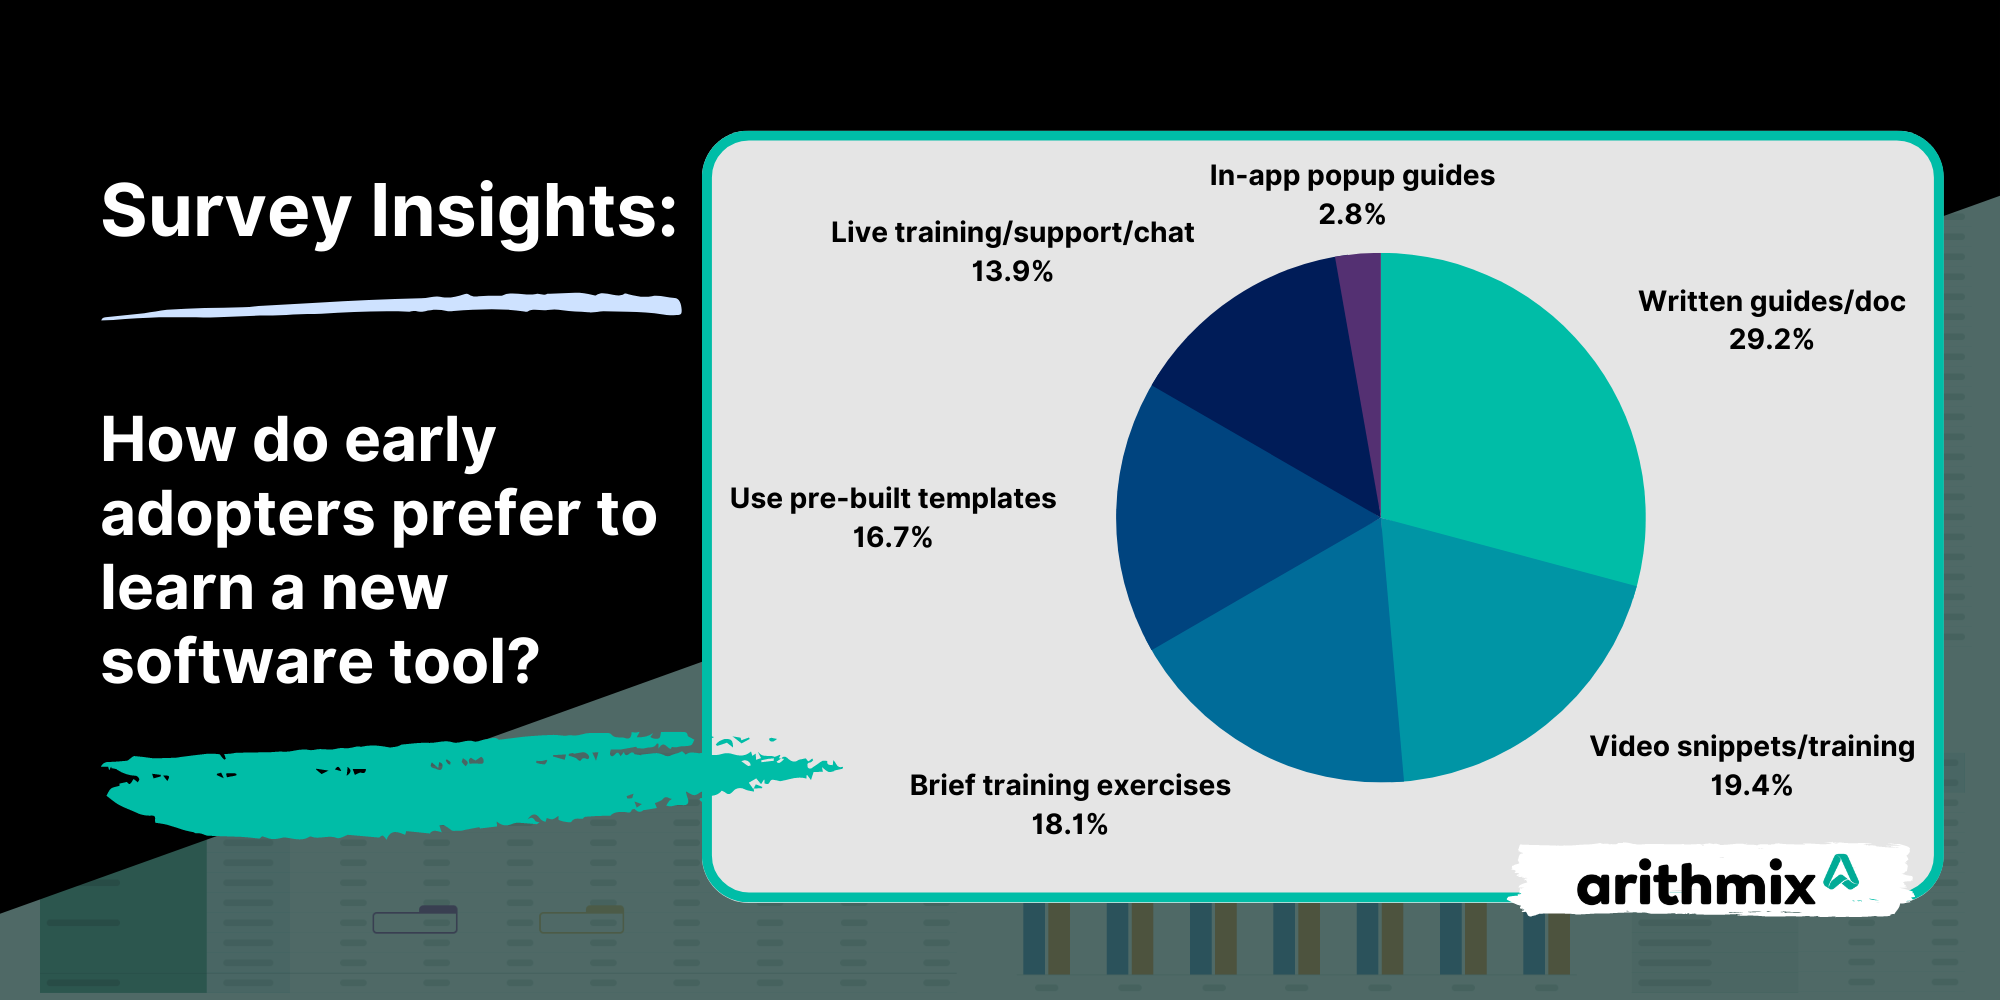 Survey Insights: how do early adopters prefer to learn a new software tool?